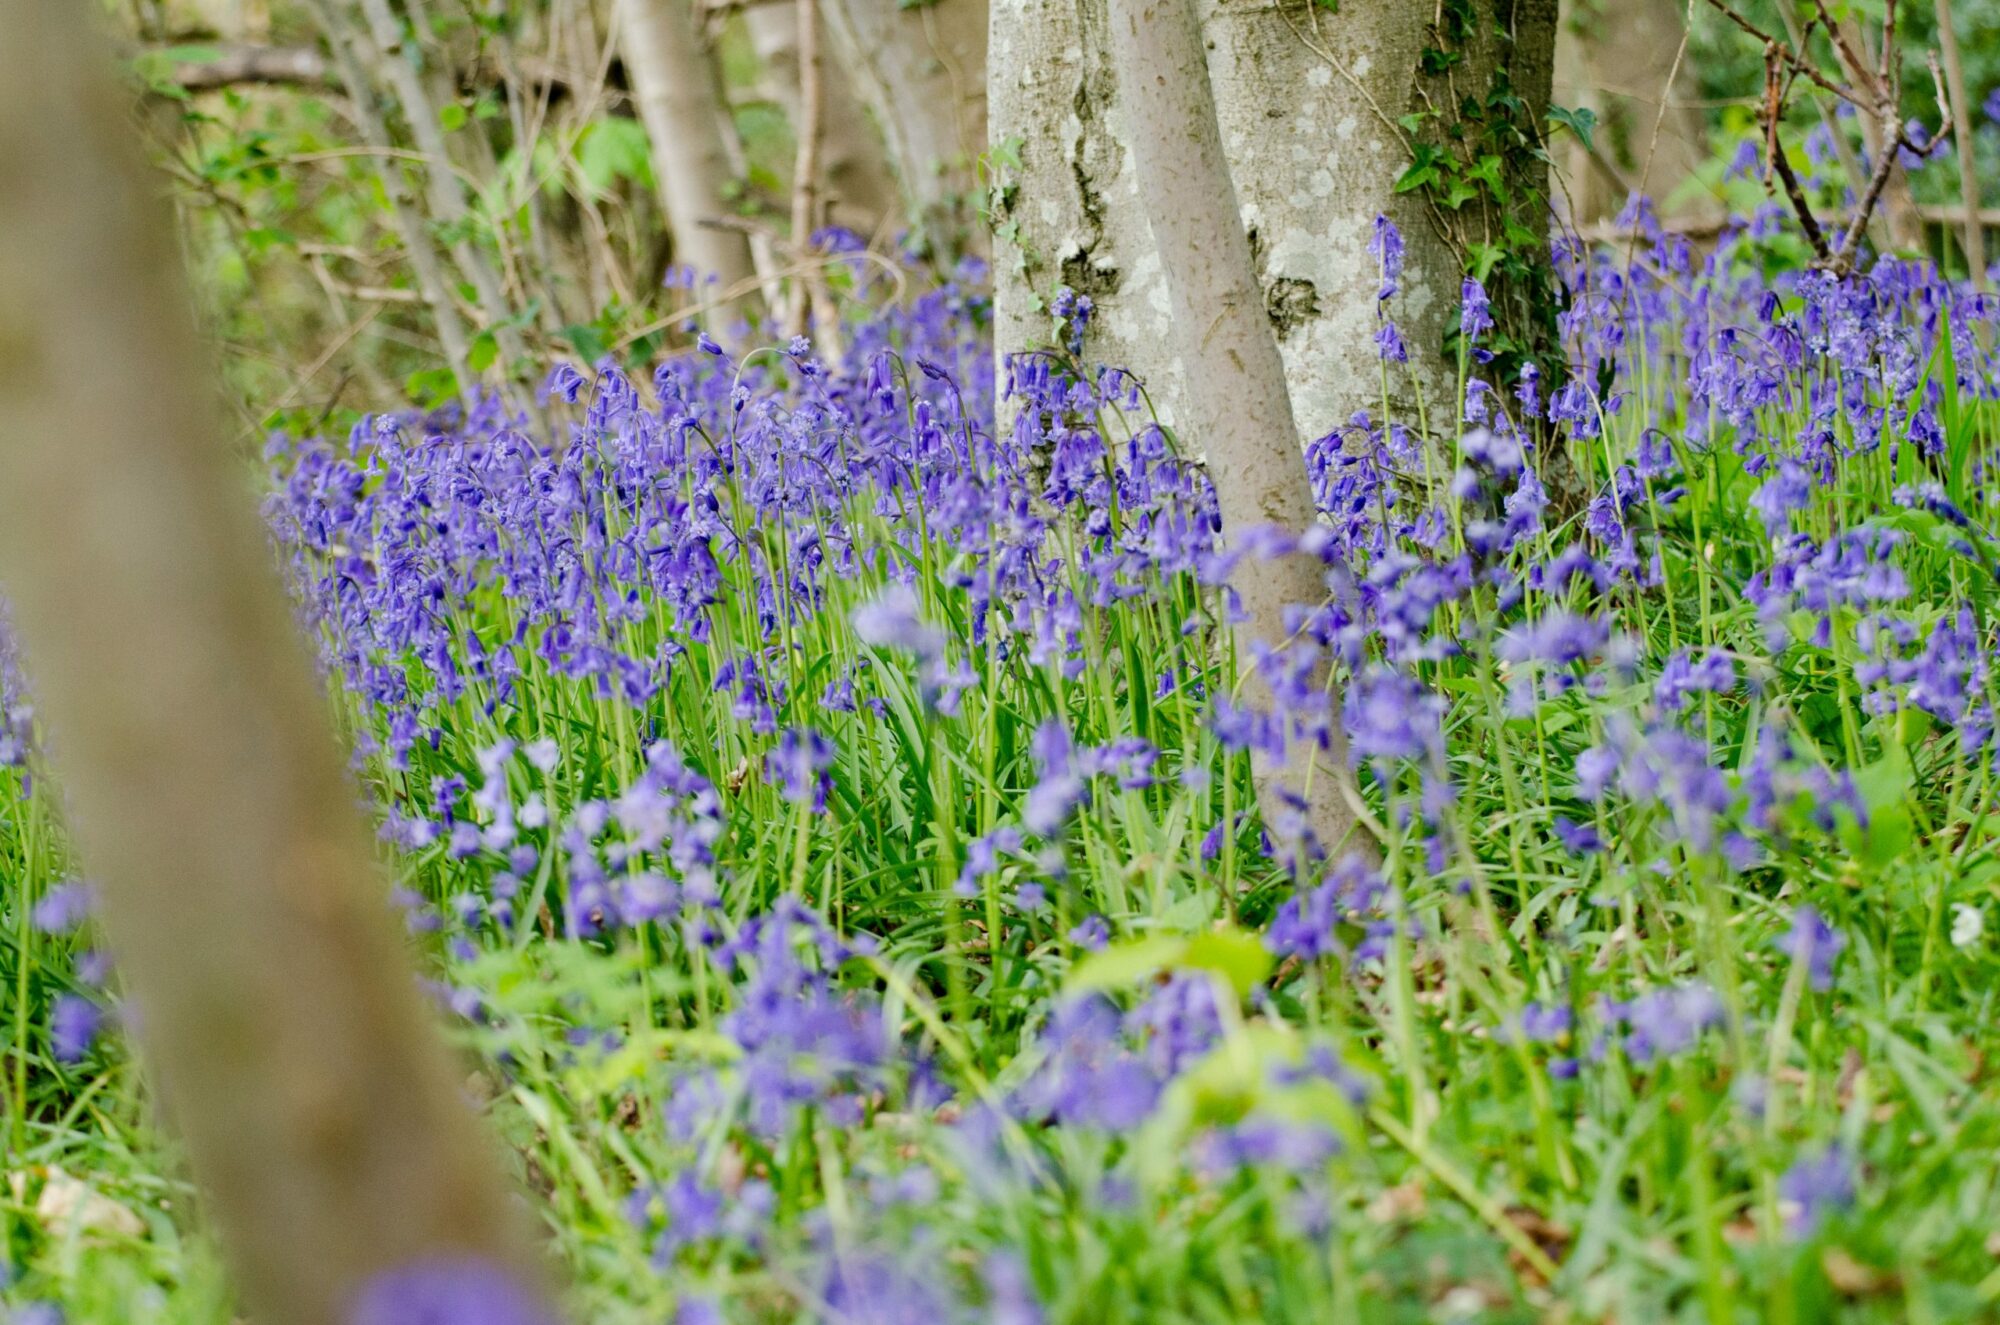 Image name Bluebells Josh Raper Conservation Media 5 scaled 1 the 22 image from the post Walking, Wellbeing and Wildlife in Yorkshire.com.